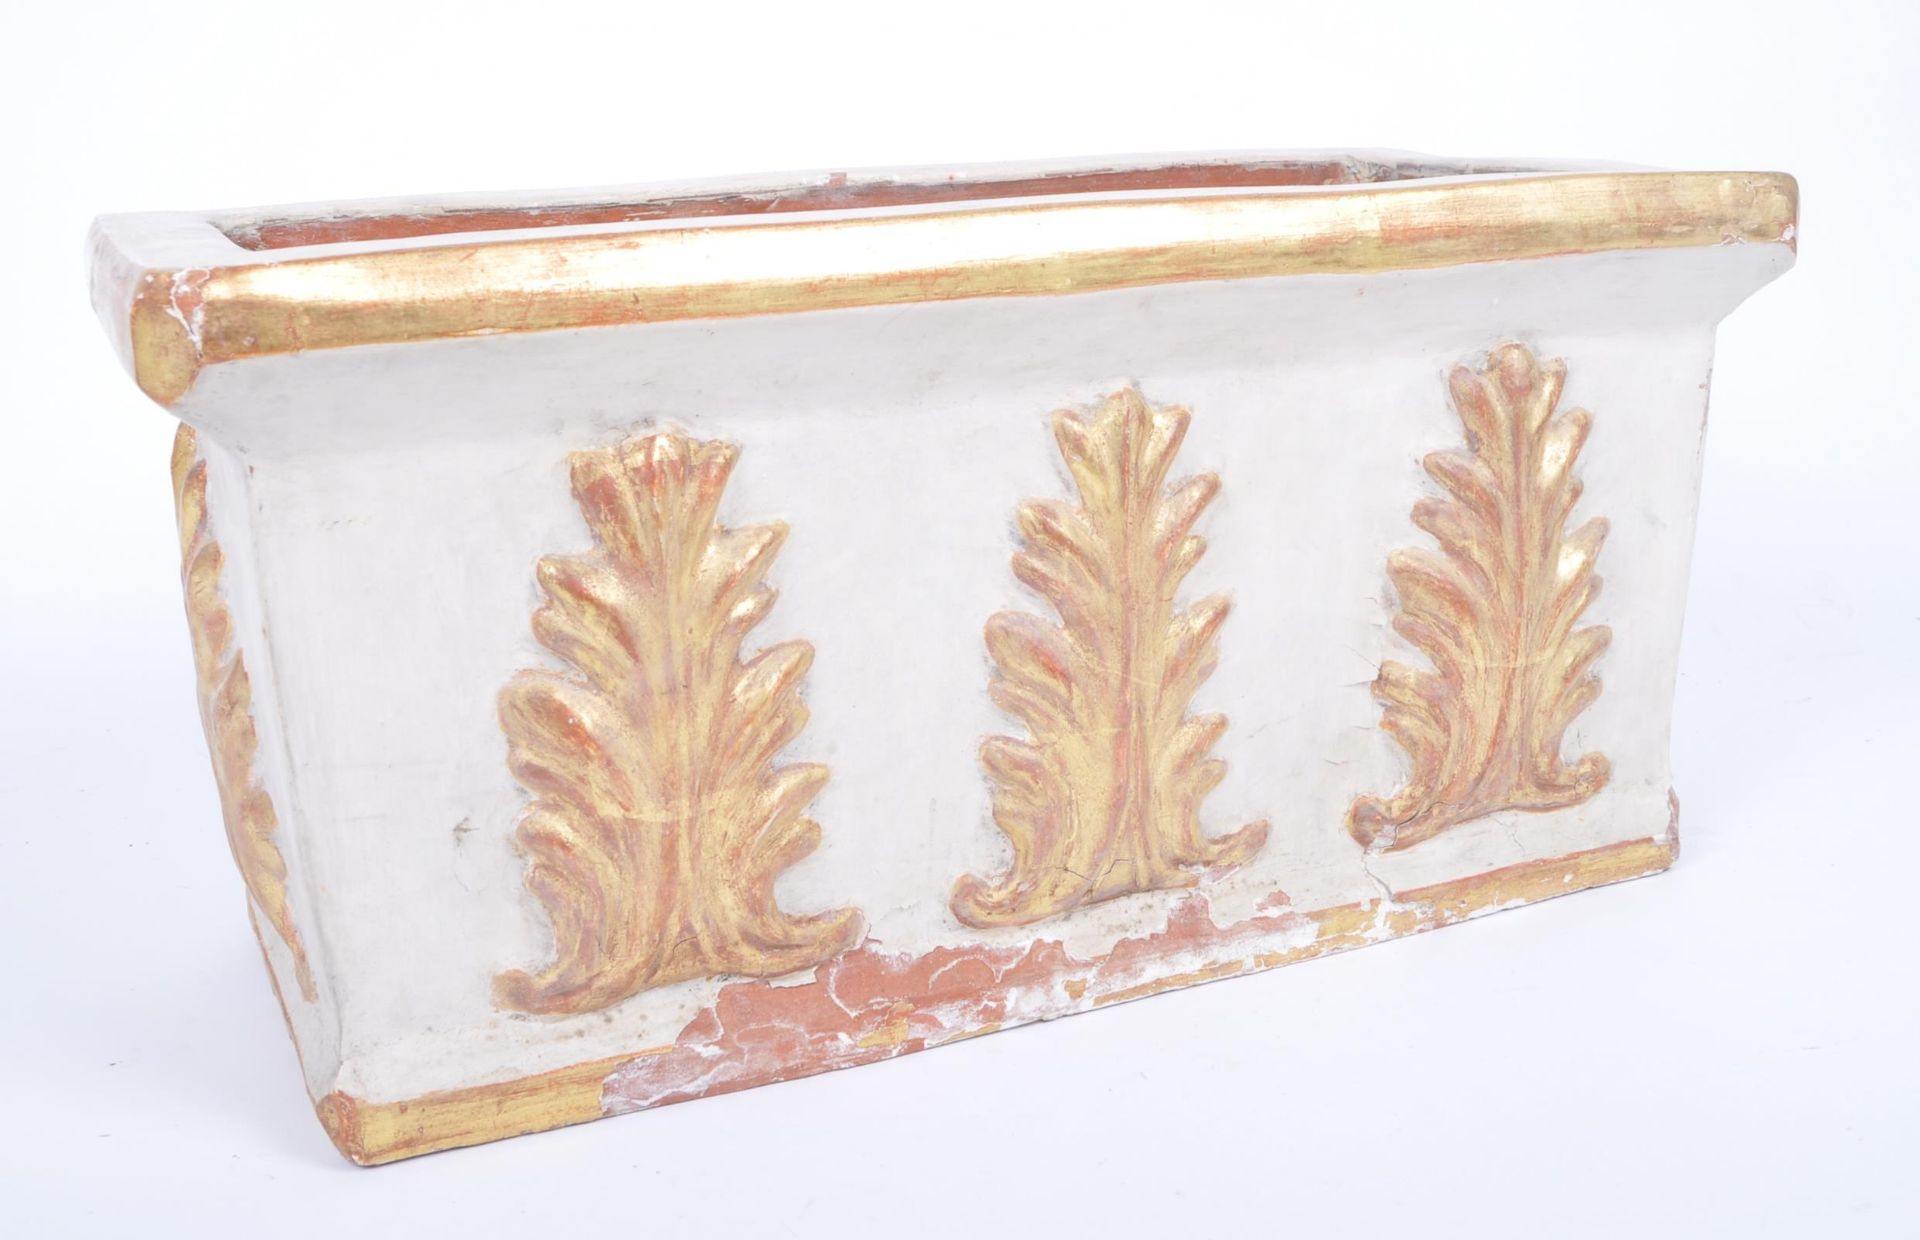 MIDCENTURY NEOCLASSICAL GILDED TERRACOTTA PLANTER - Image 2 of 6